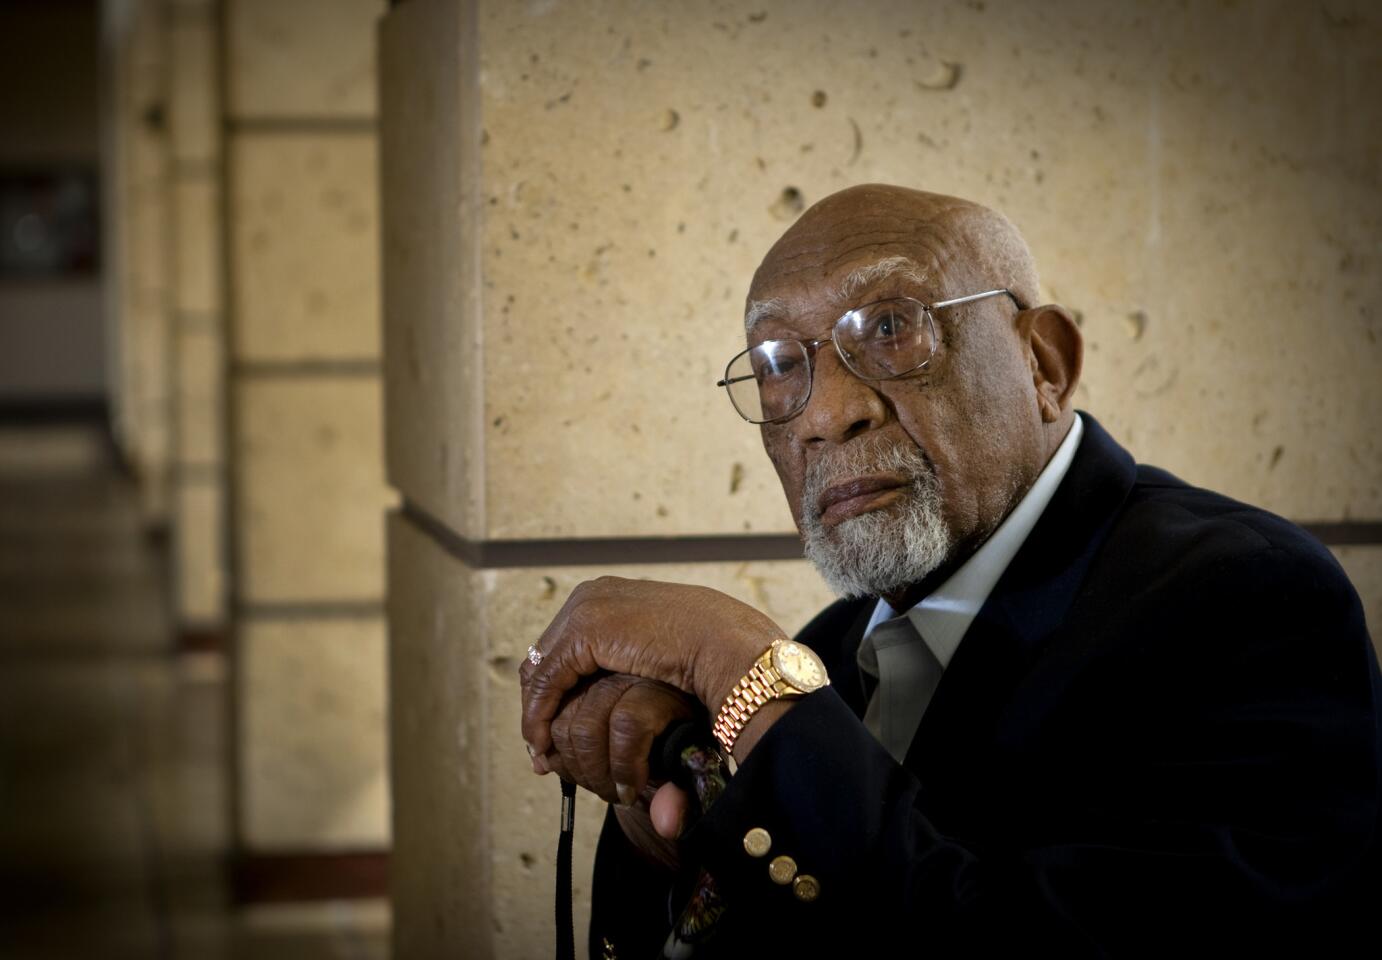 Charlie Sifford, shown in 2011, before his induction into the golf Hall of Fame.